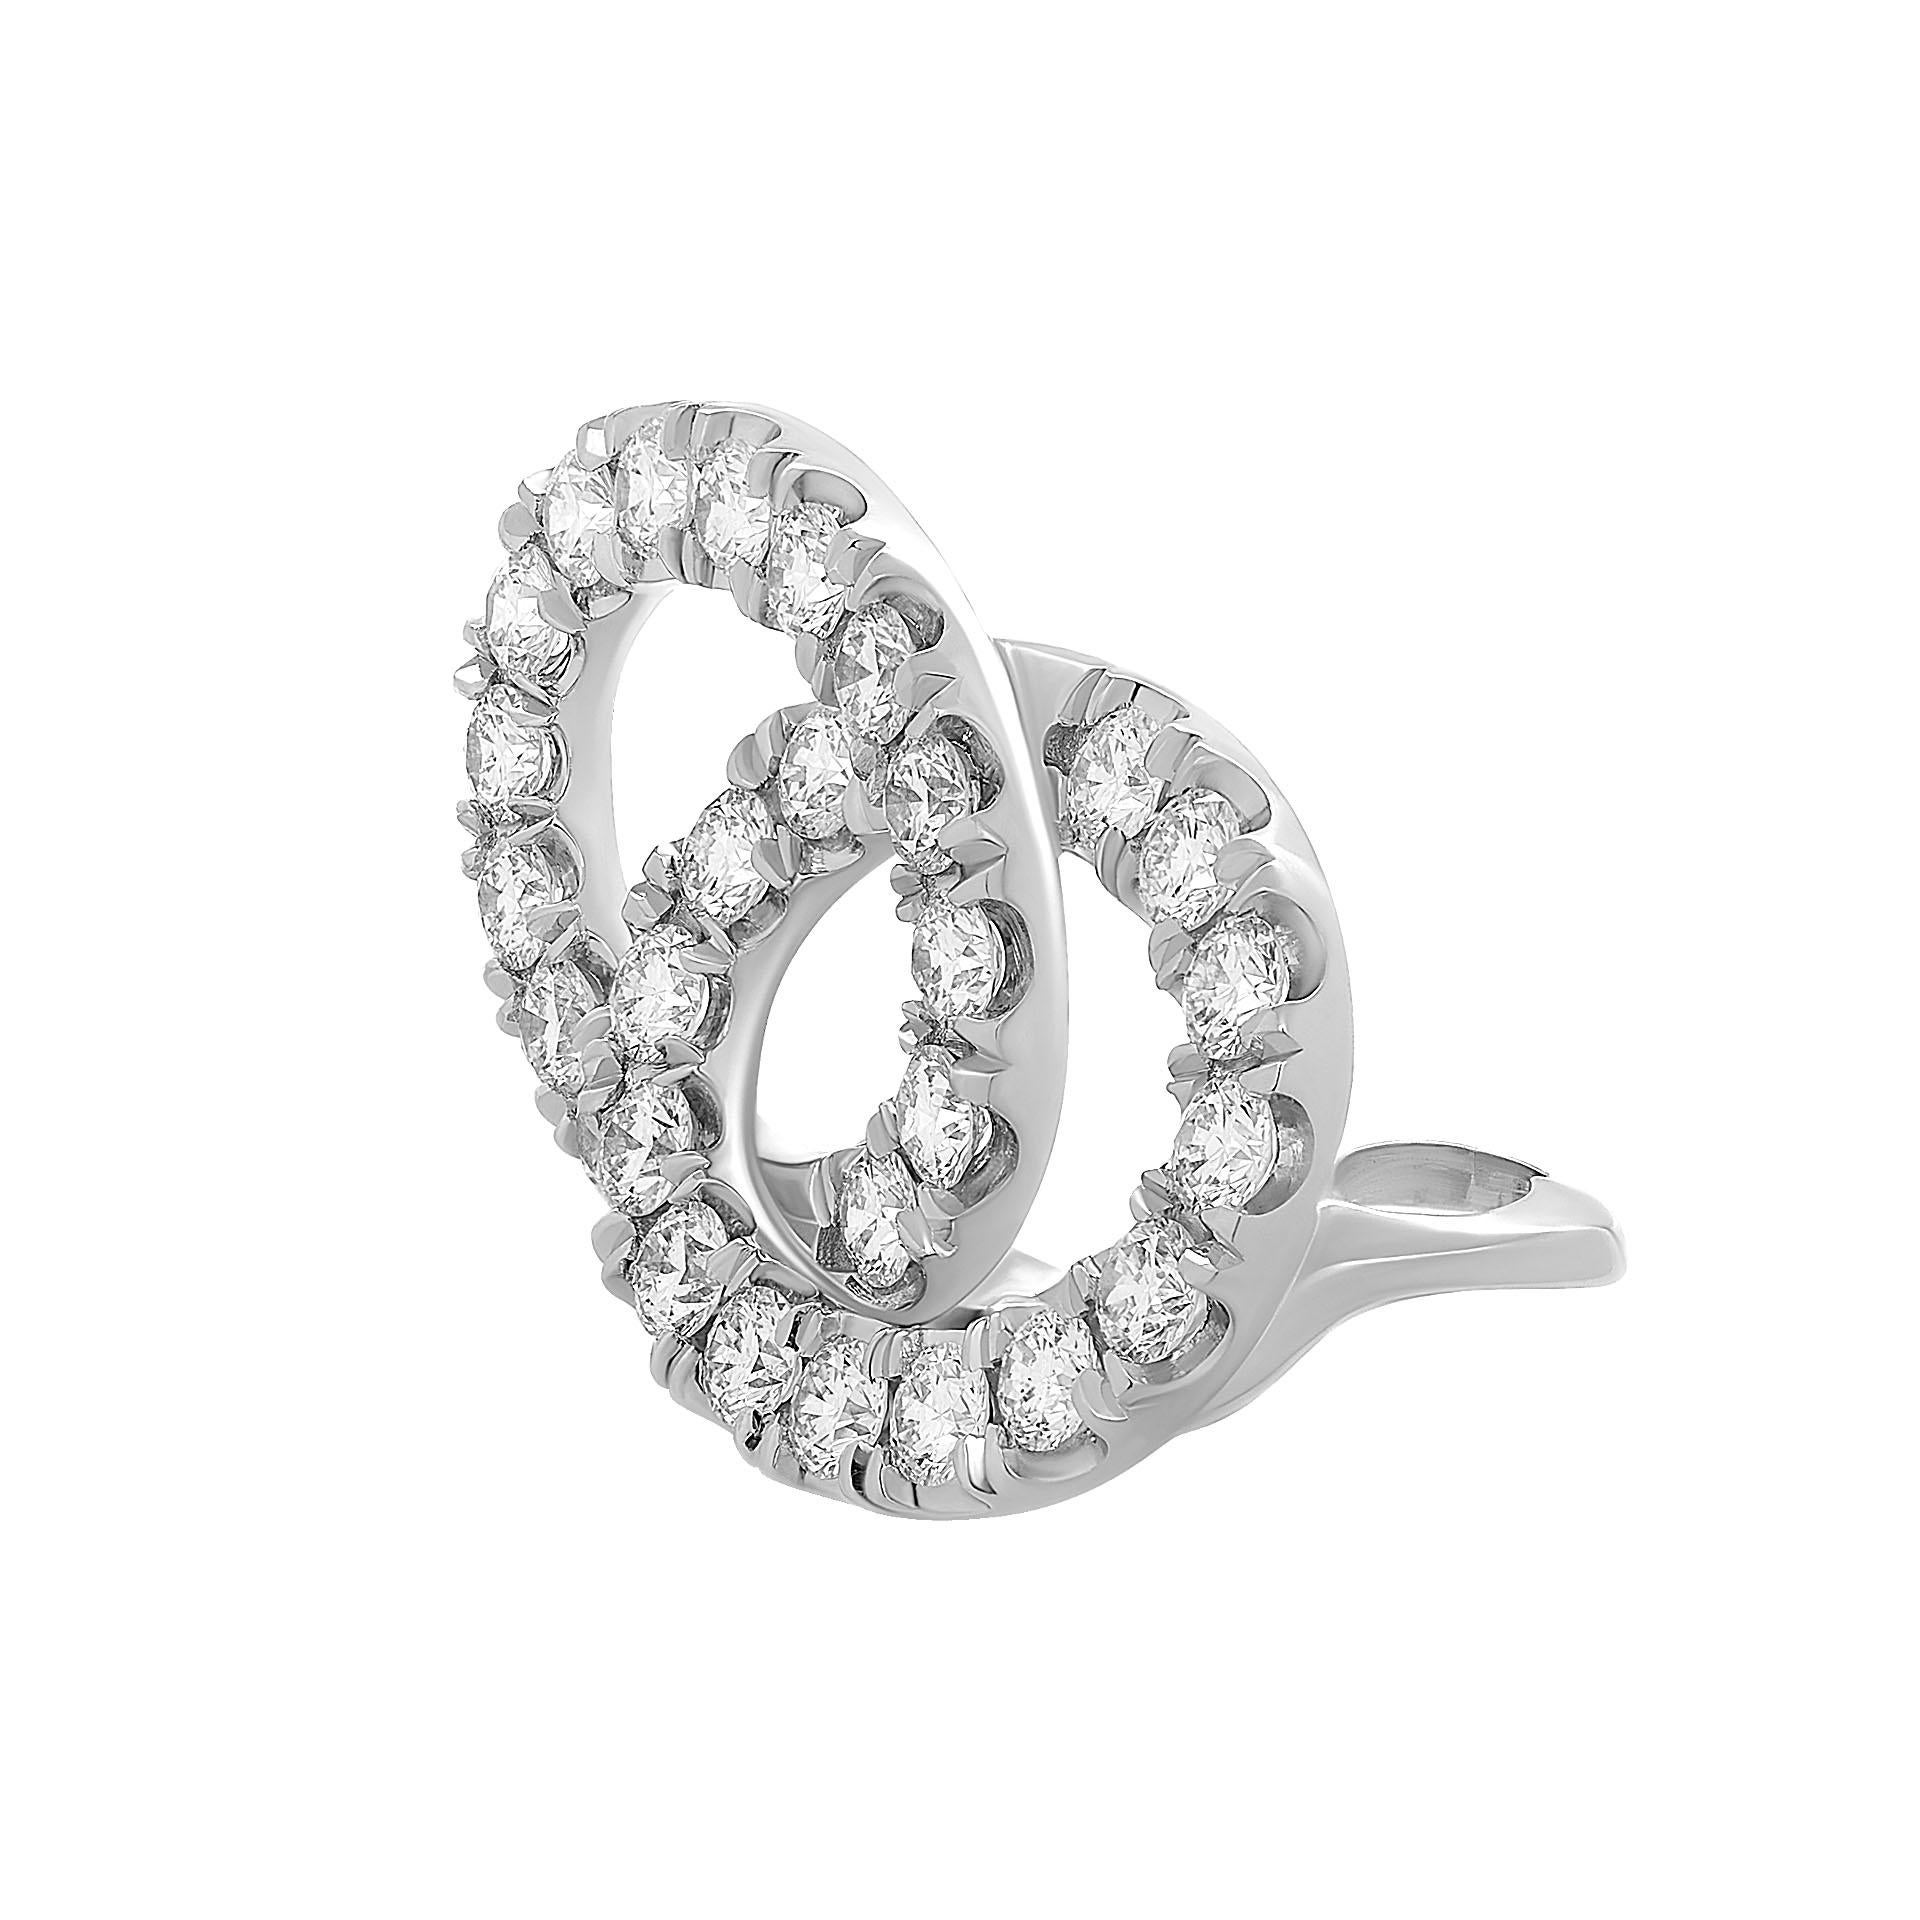 Double Circle Overlap Earrings with diamonds in 18K White Gold in 18K White Gold Earrings 
with 56 diamonds 2.9mm each totaling 5.04 carat, 
F-G color VVS-VS clarity 
